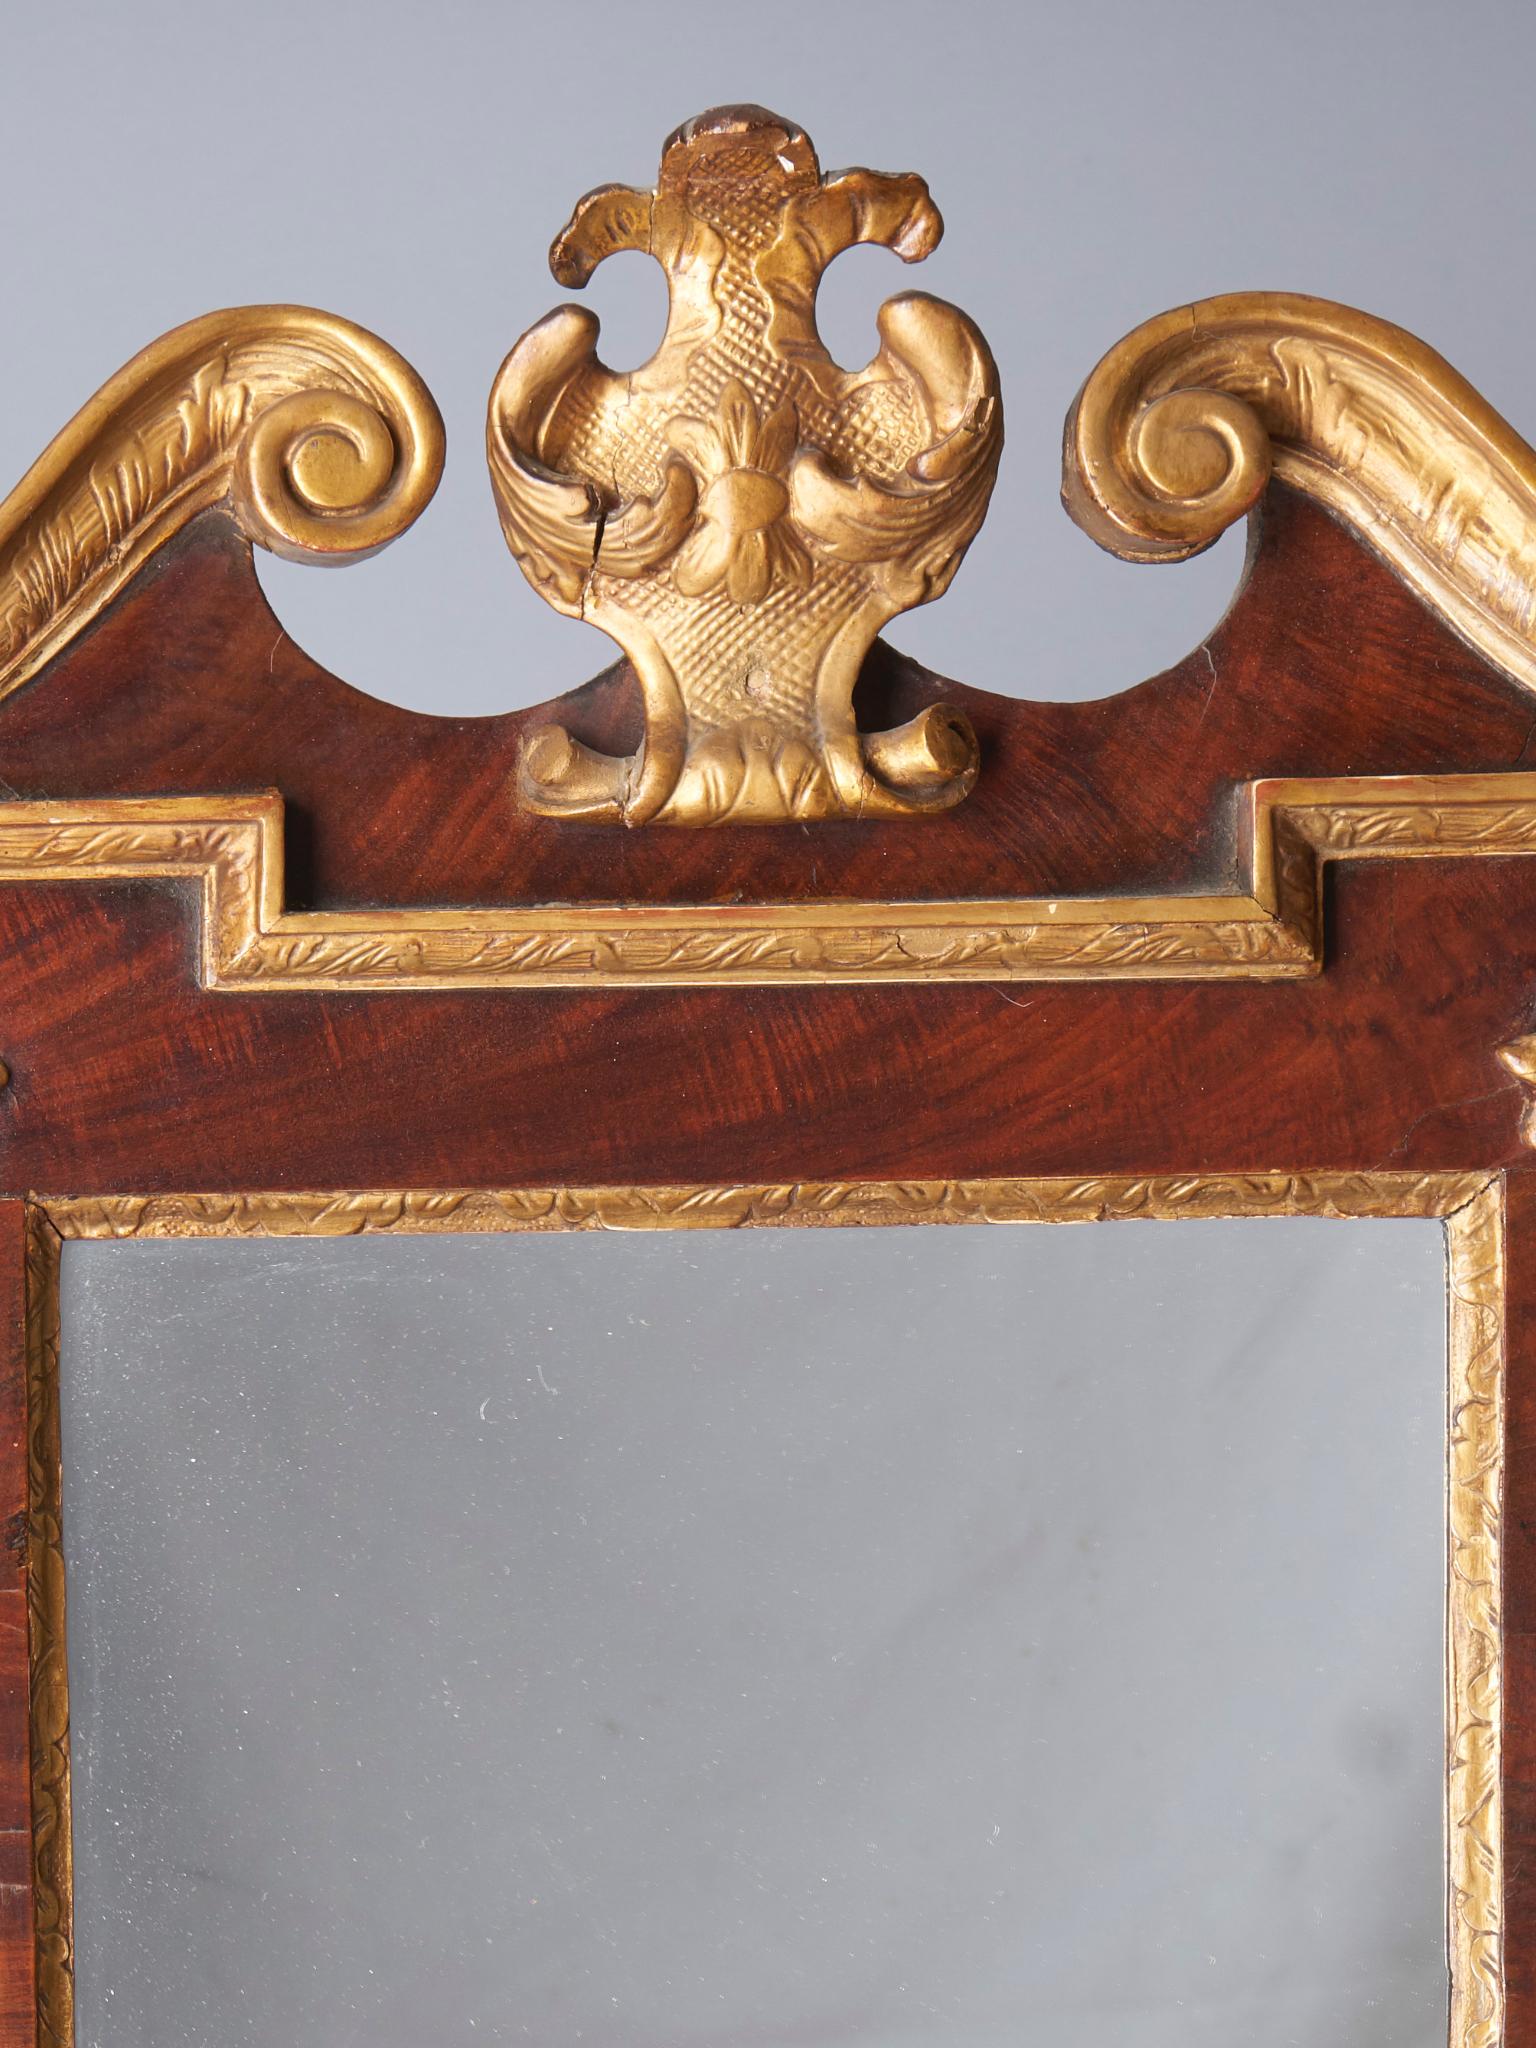 Gilded swags, scrolls and cartouche on mahogany. English, circa 1760.